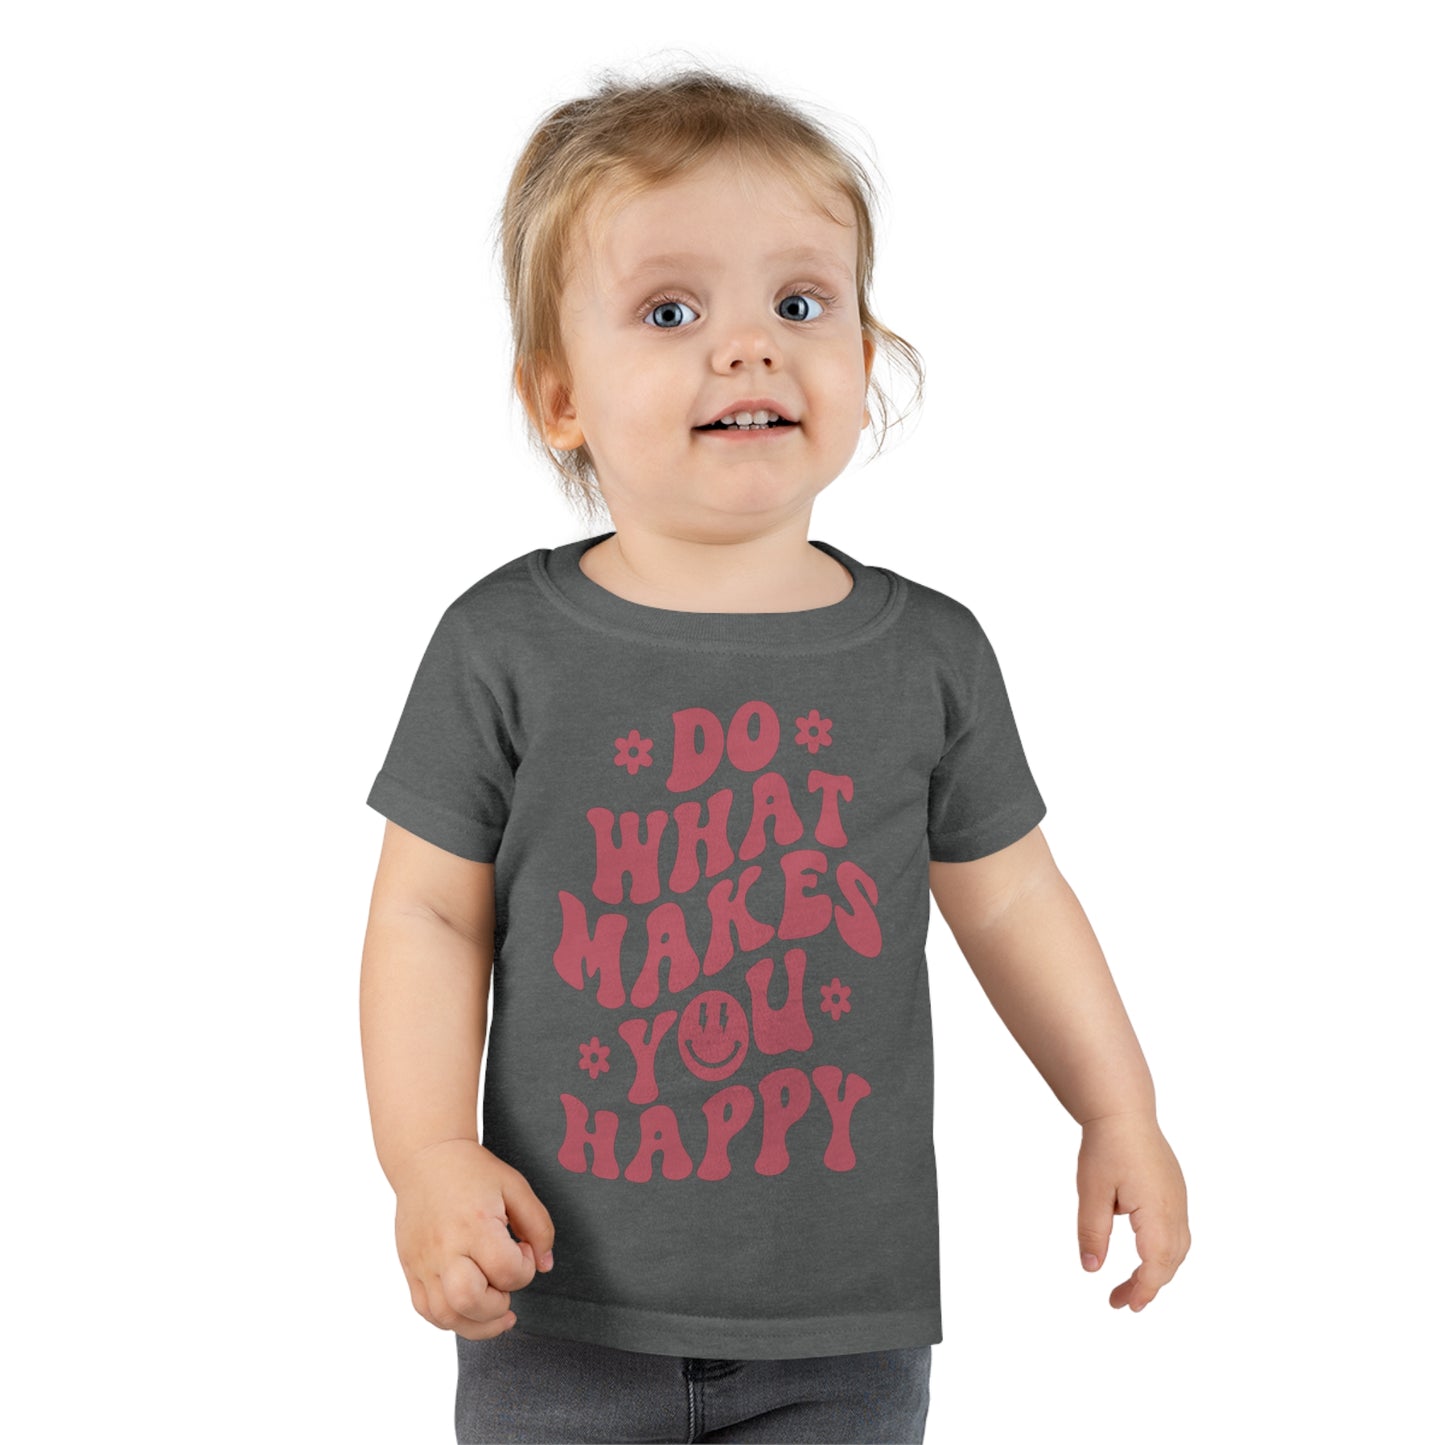 Do what makes you happy - Toddler T-shirt